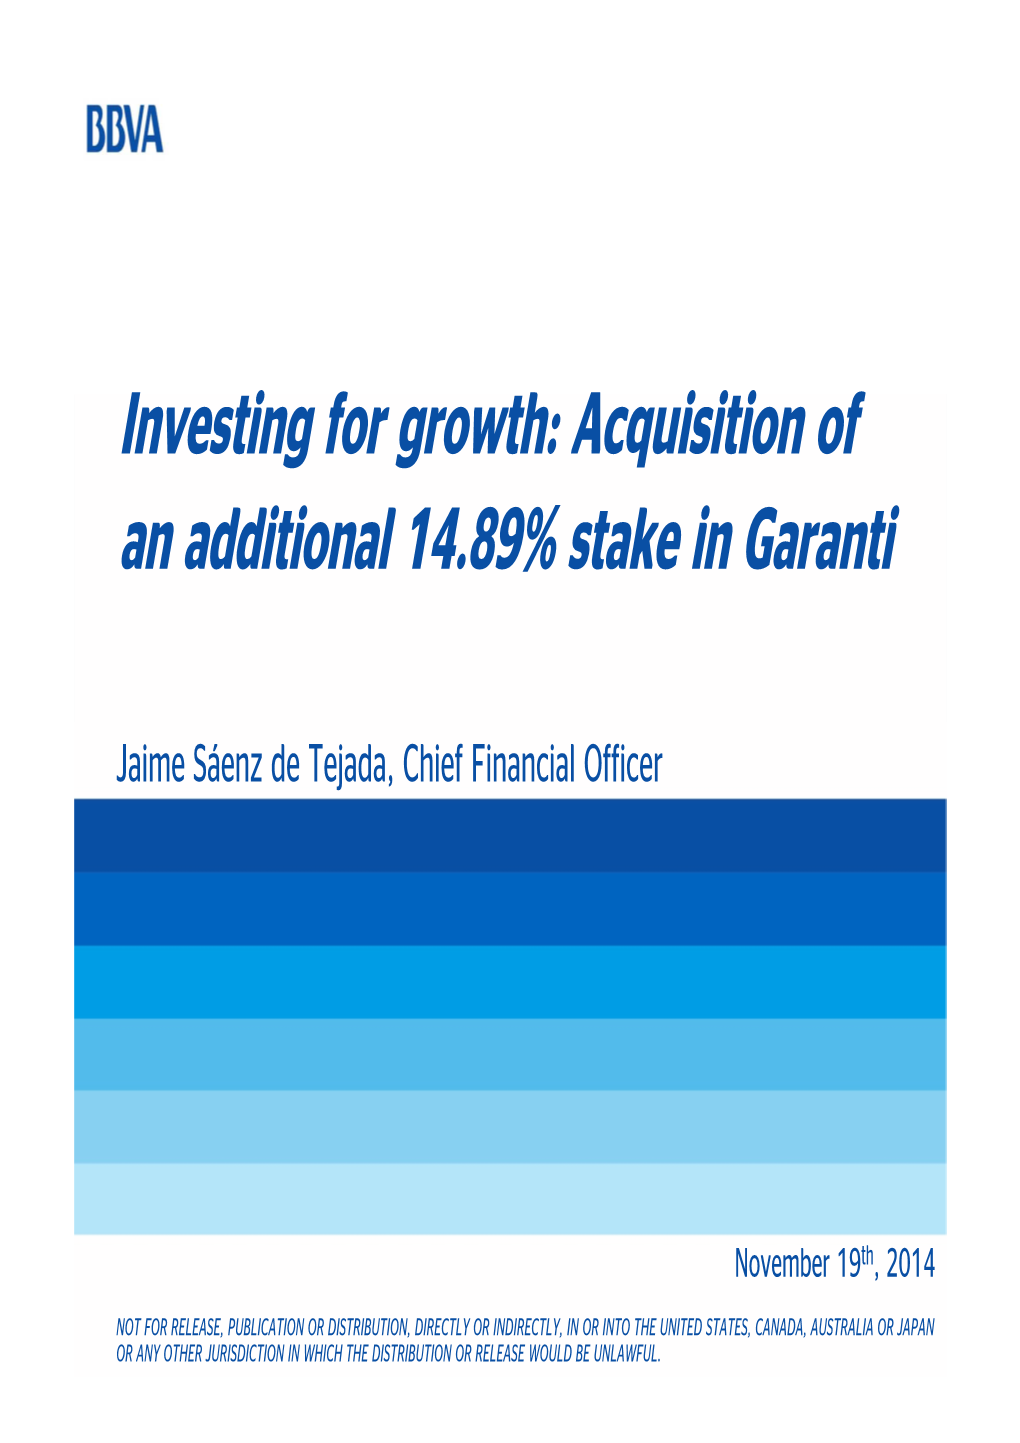 Investing for Growth: Acquisition of an Additional 14.89% Stake in Garanti